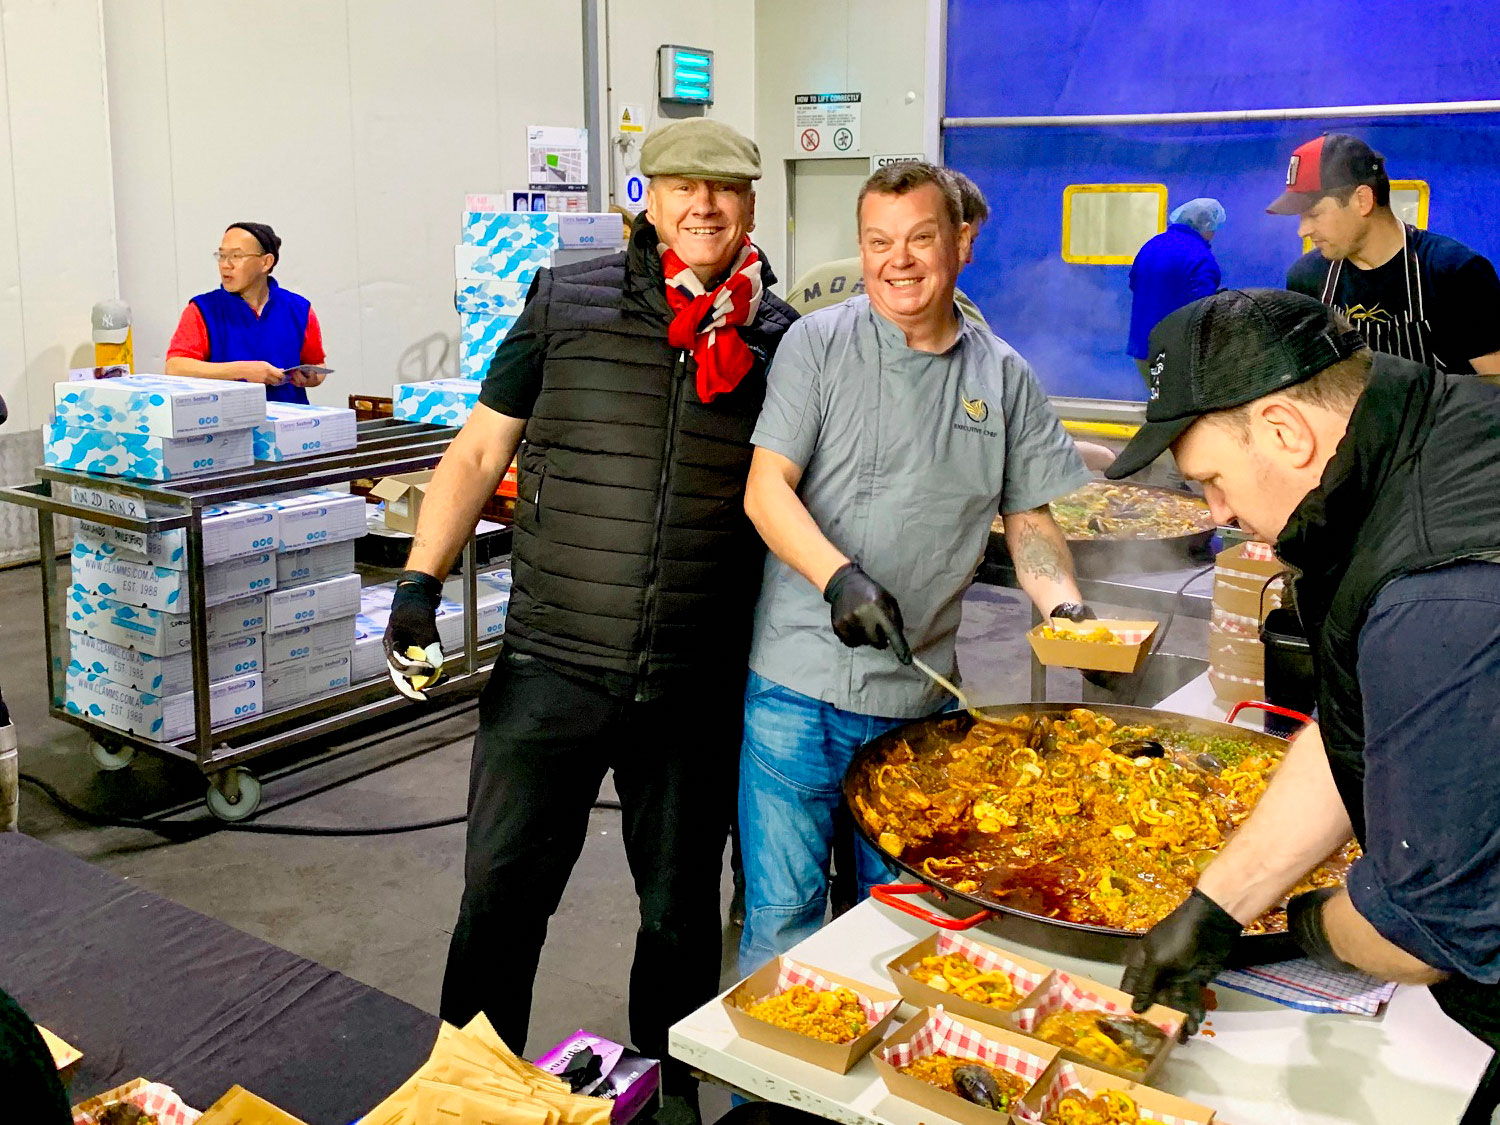 Chef Ian Curley makes hot meals each Saturday at Clamms Seafood as a part of their Help Hospo programme offers free boxes of seafood to hospitality workers who have lost their jobs and have been impacted by Covid-19.